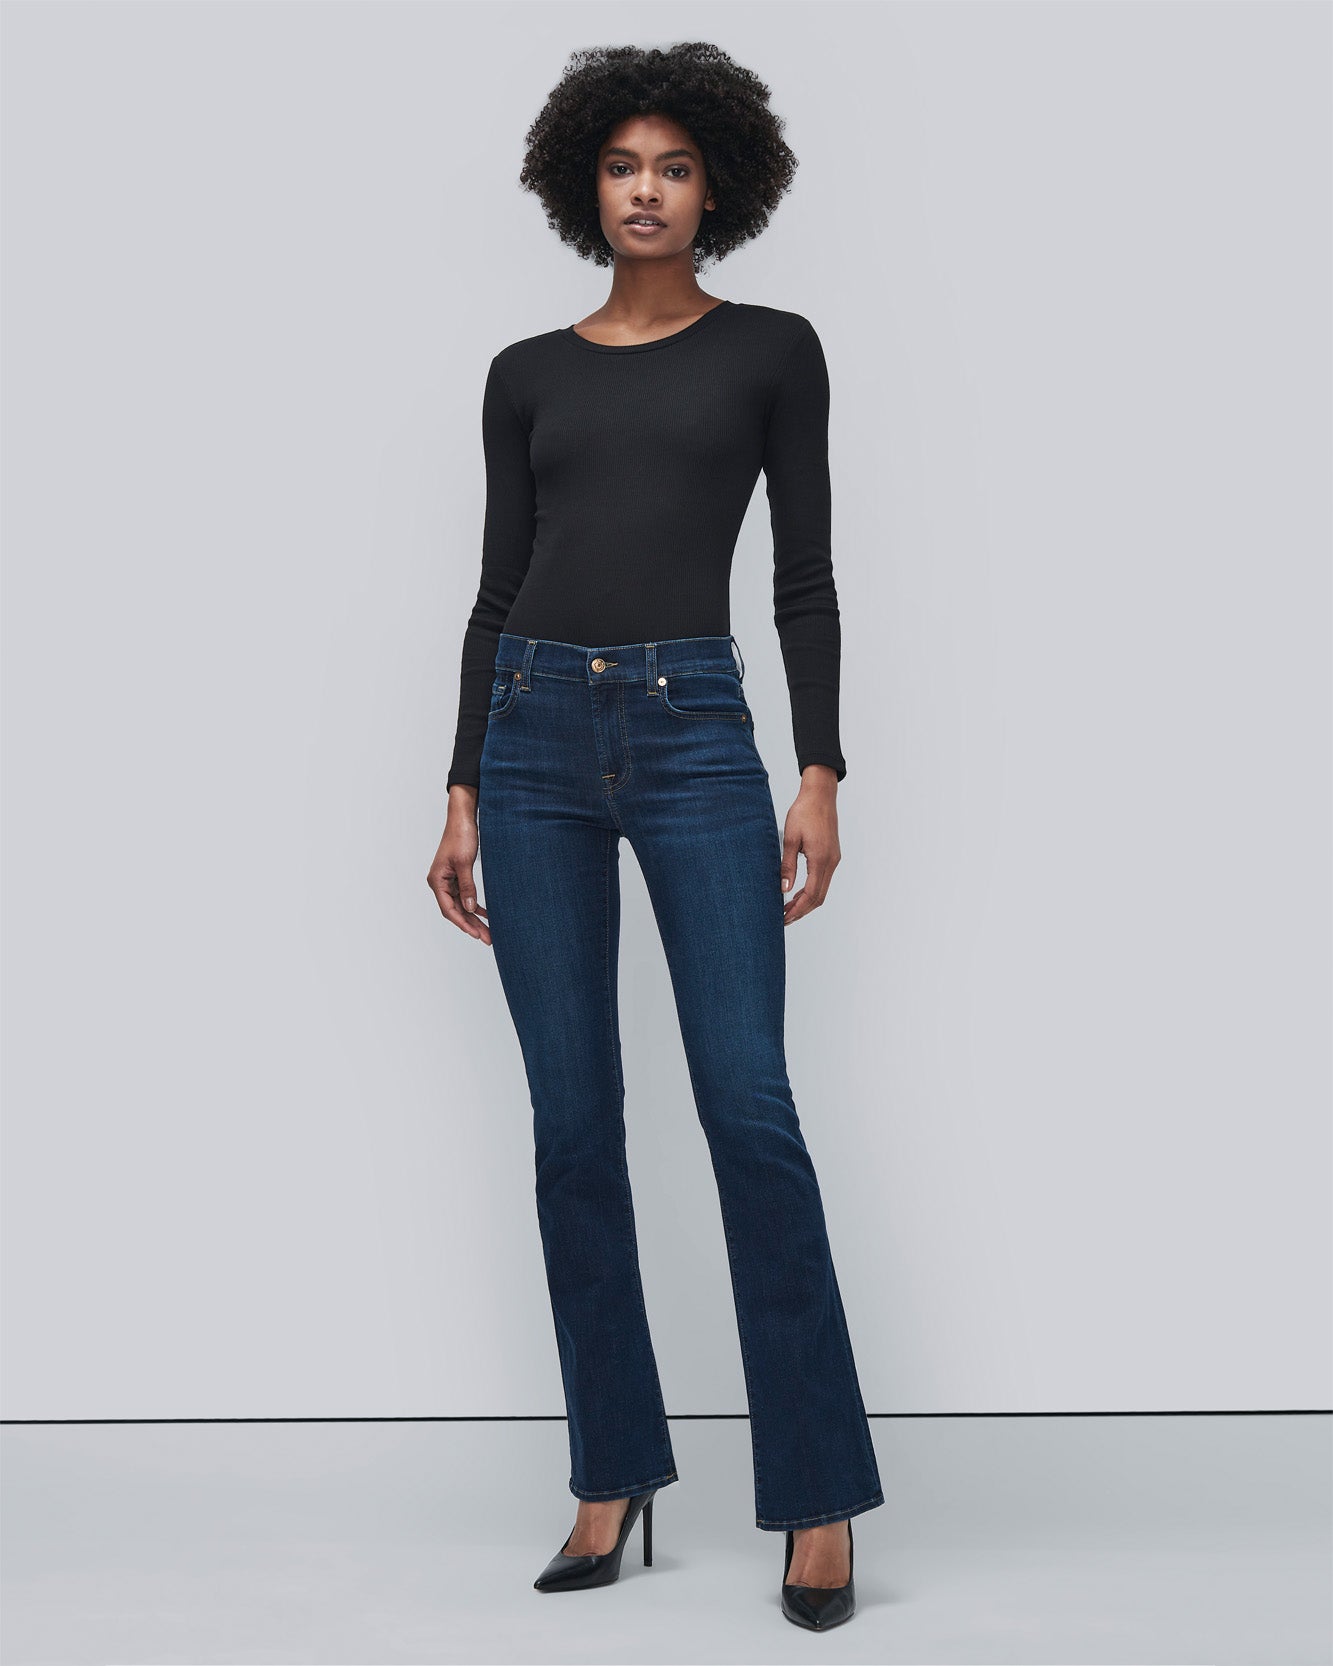 B(air) Kimmie Bootcut in Rinsed Indigo | 7 For All Mankind